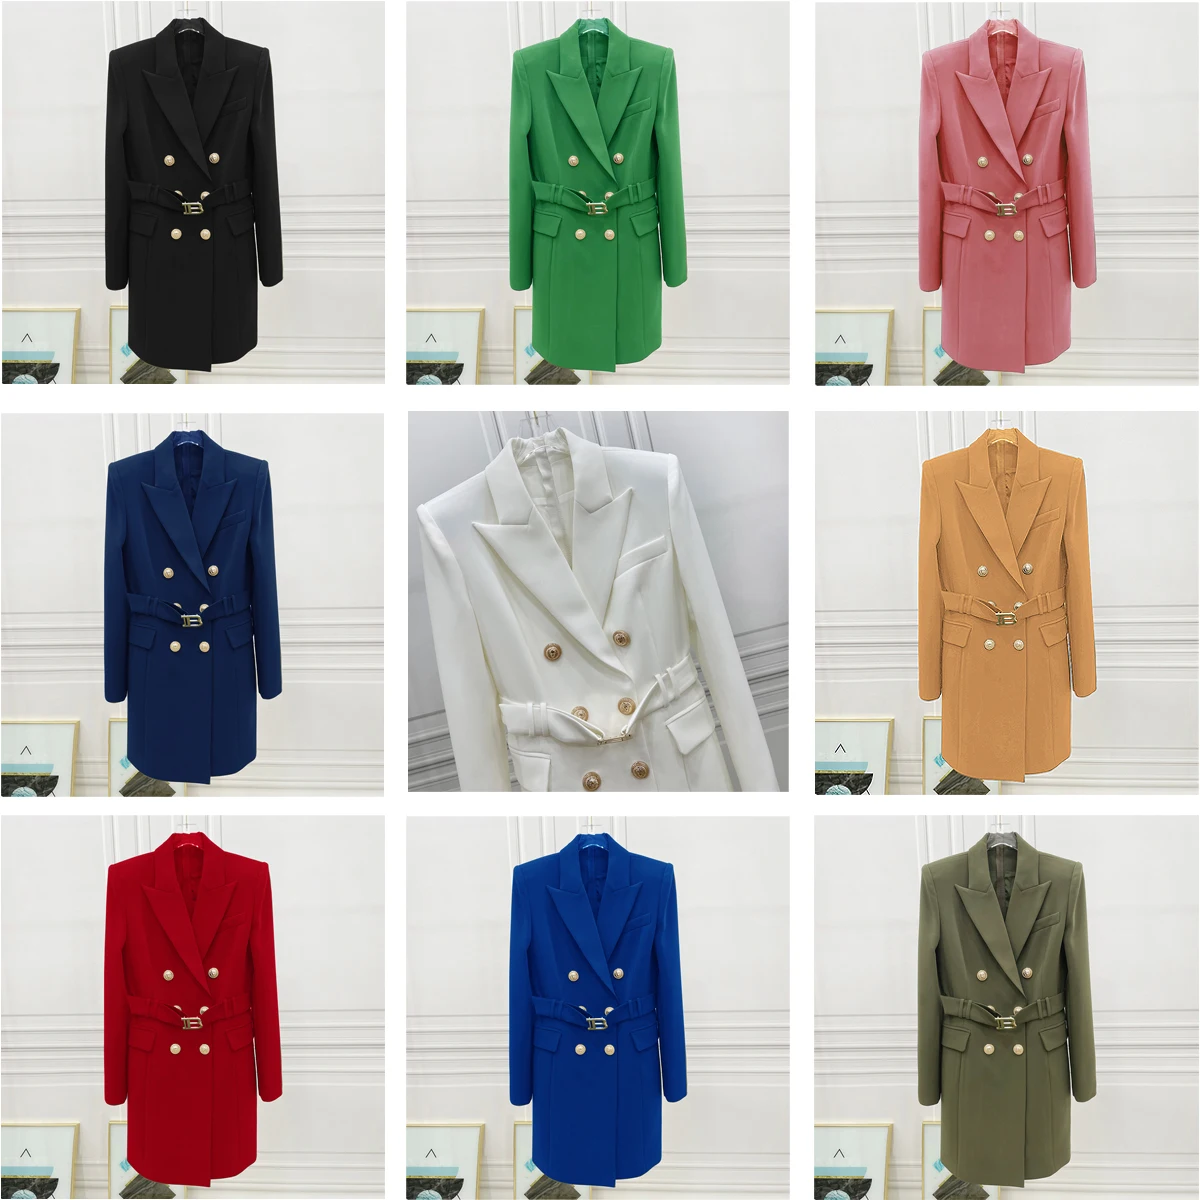 S-3xl Spring And Autumn Net Red Popularity High Quality New Product Slim Fit And Thin Color Women's Blazer A-line Dress Jacket